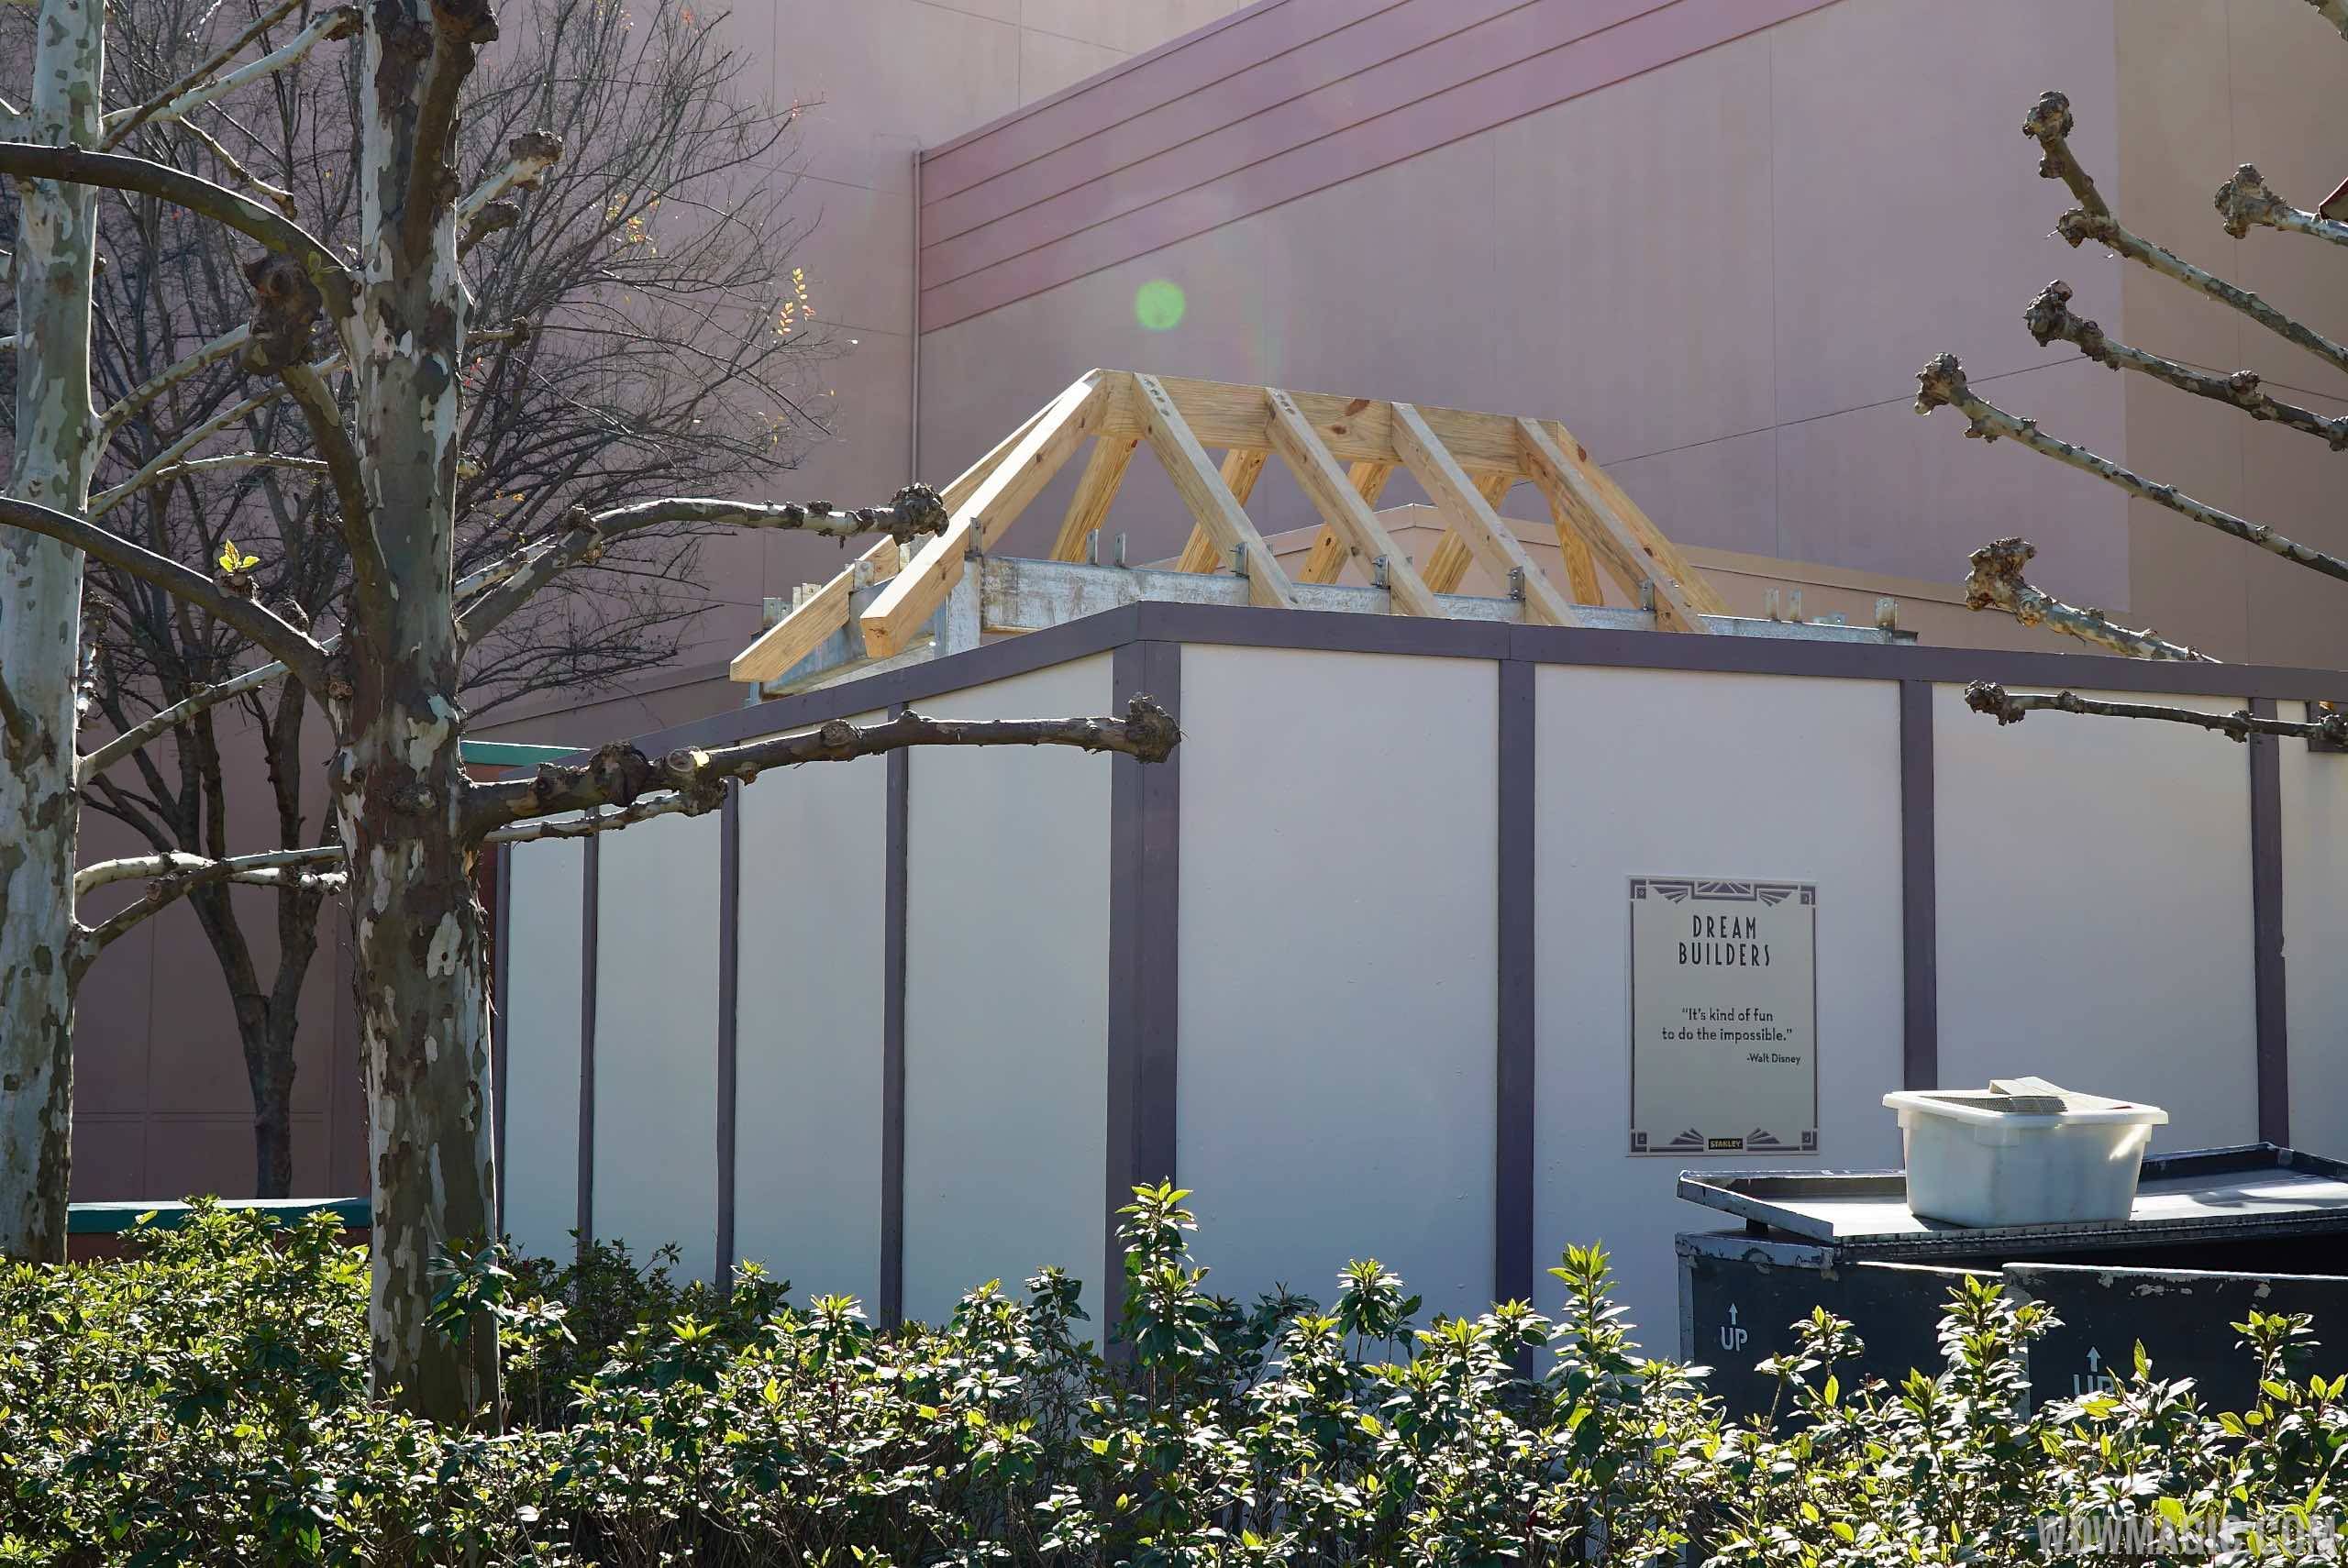 PHOTOS - Construction taking place near the exit of The Great Movie Ride